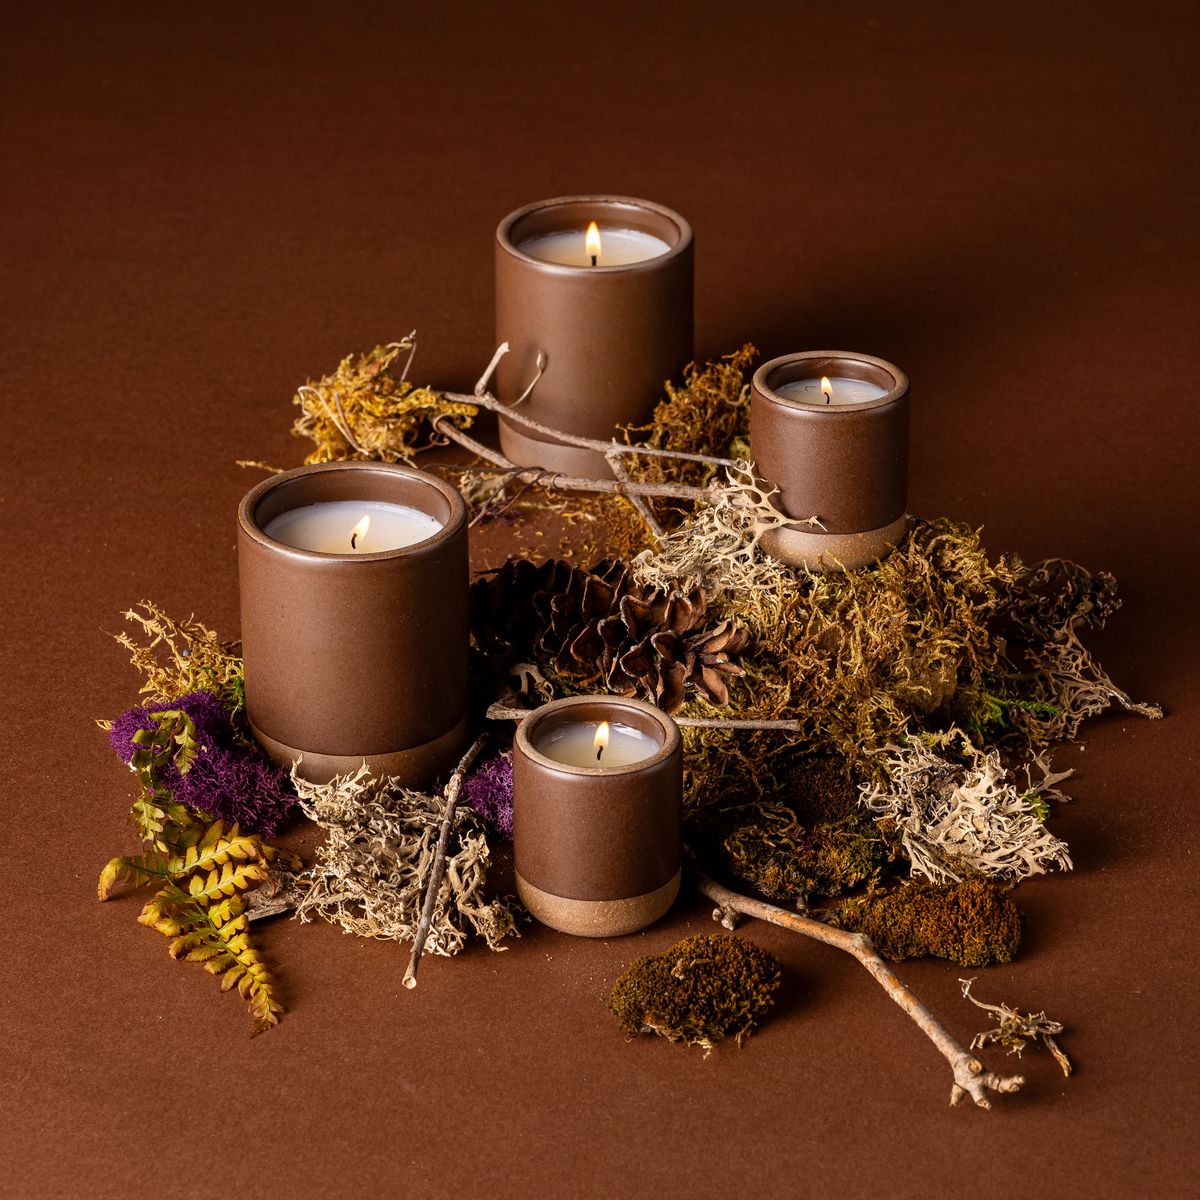 Four lit candles in ceramic vessels in a dark brown color with a match lighting one. They are artfully arranged and surrounded by dried grass, branches, and fern leaves.